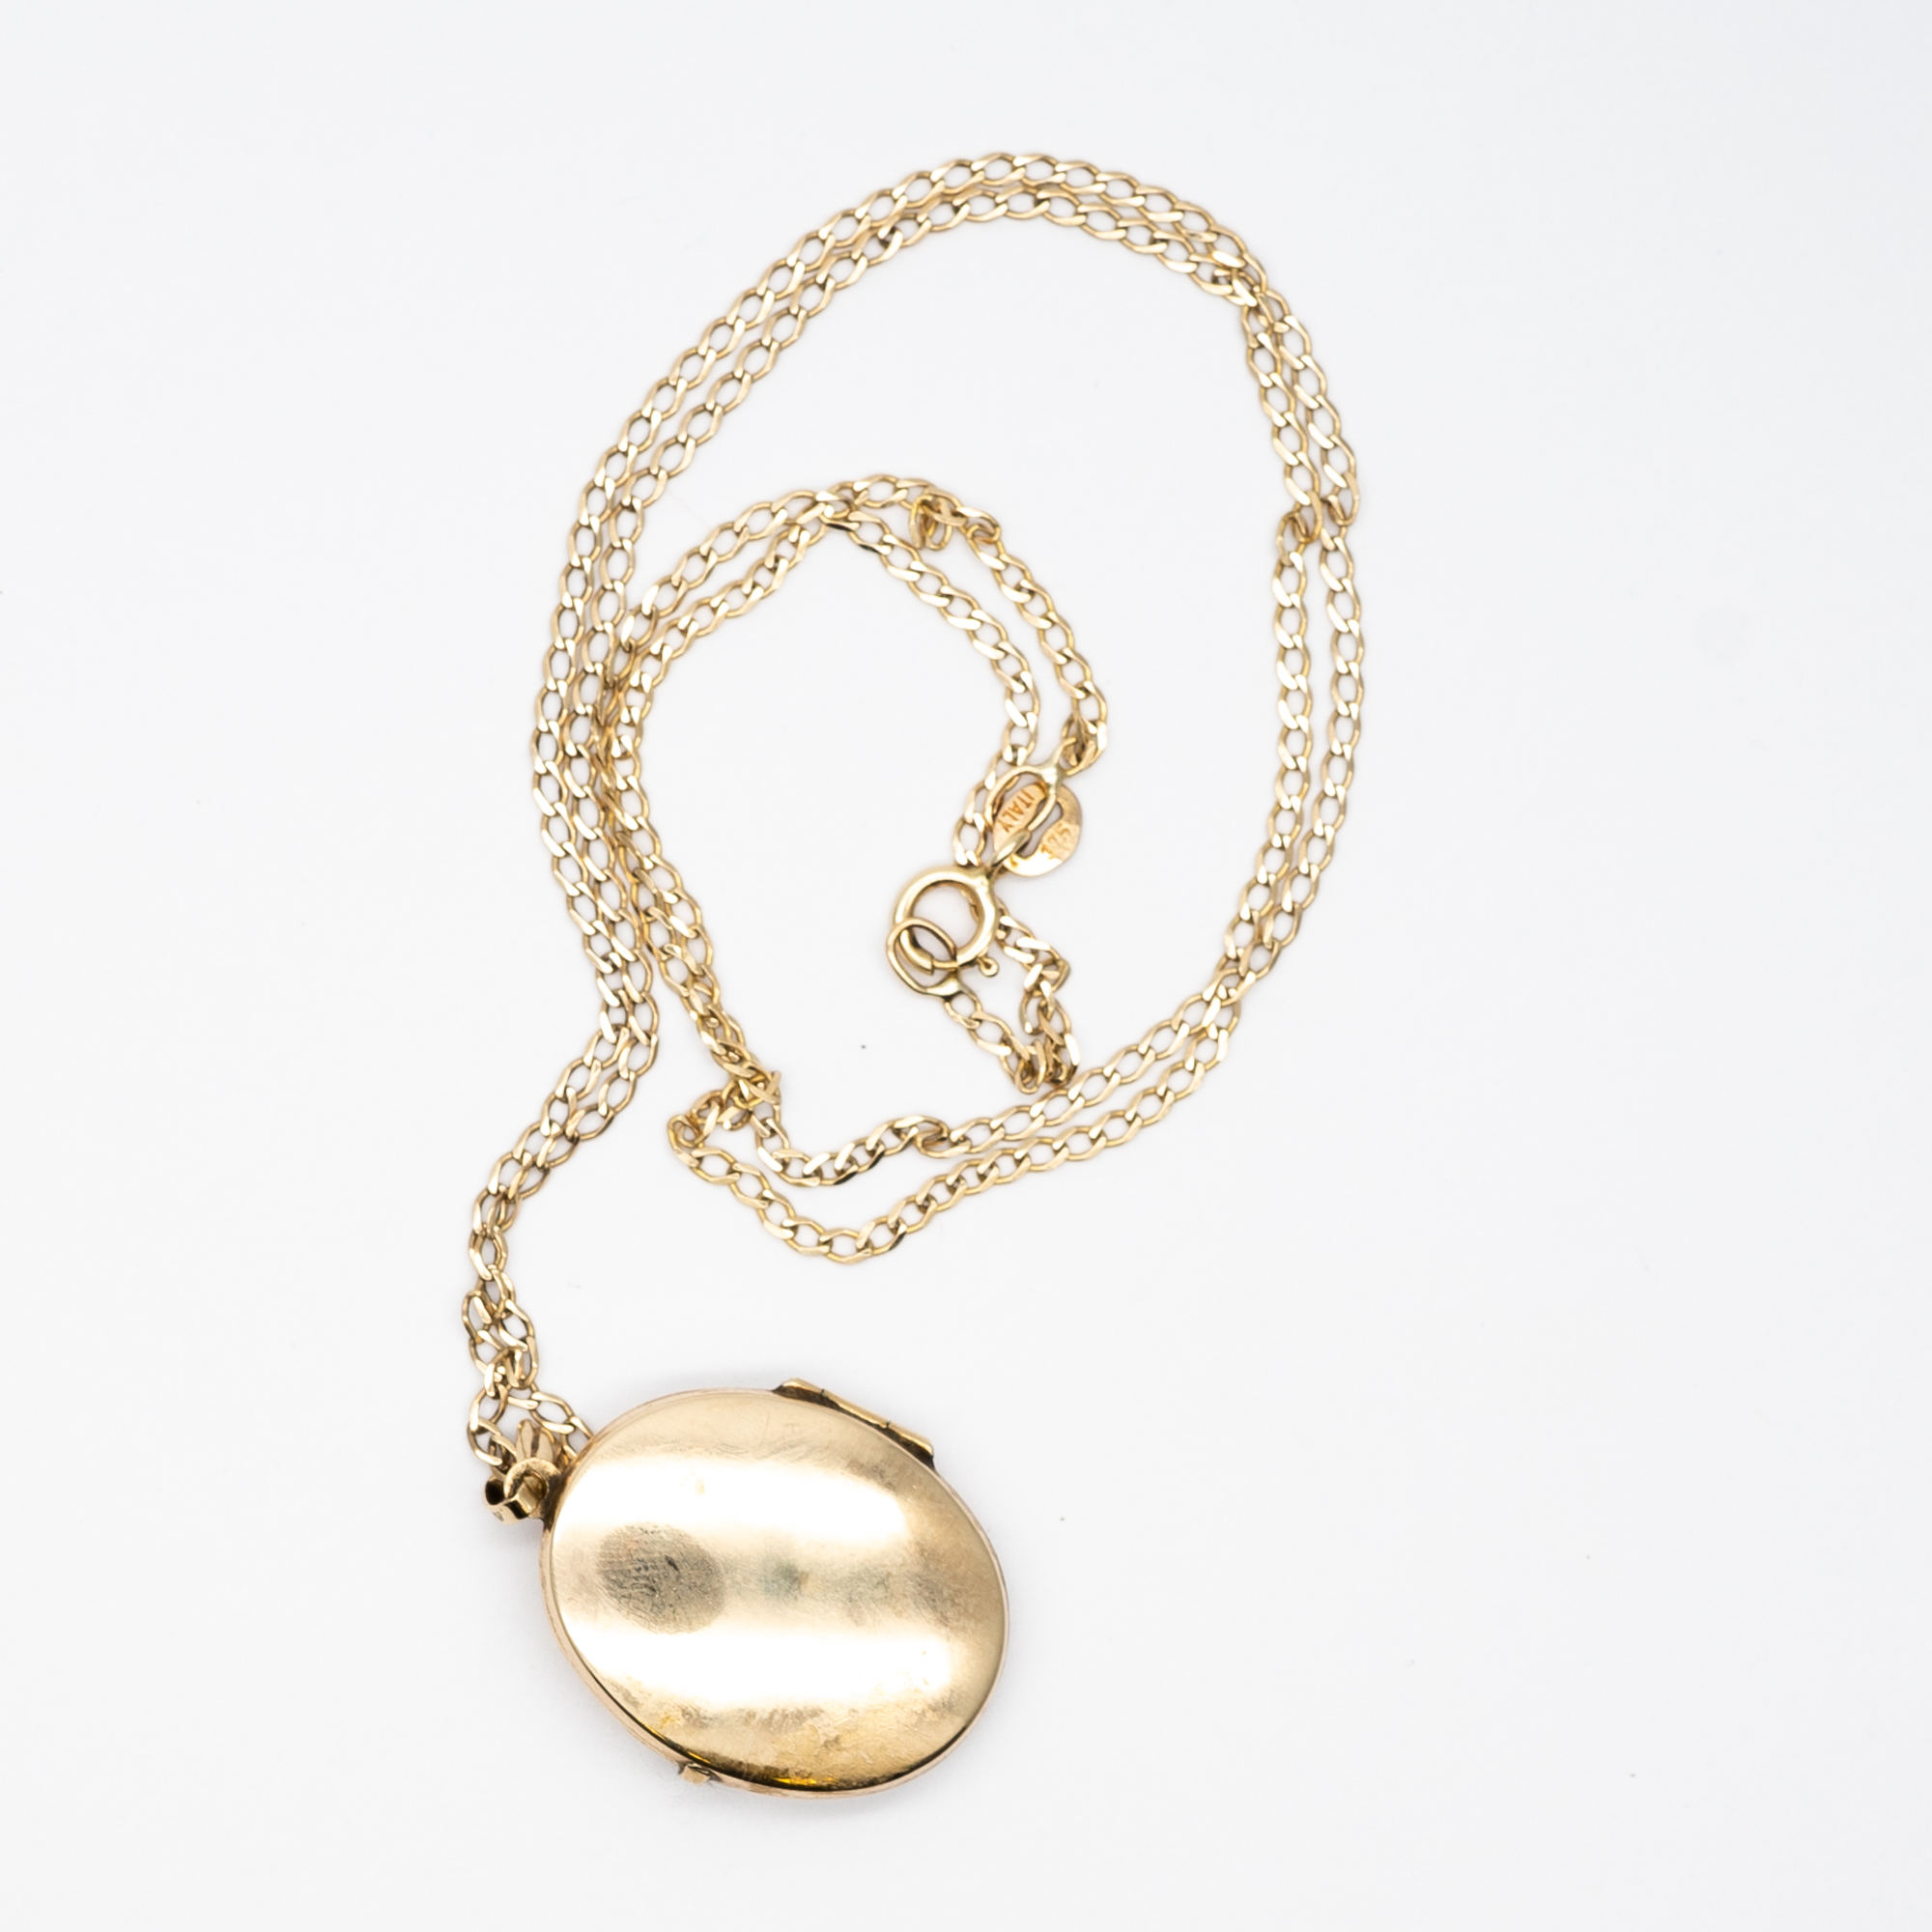 A 9ct yellow gold locket and chain - Image 2 of 3